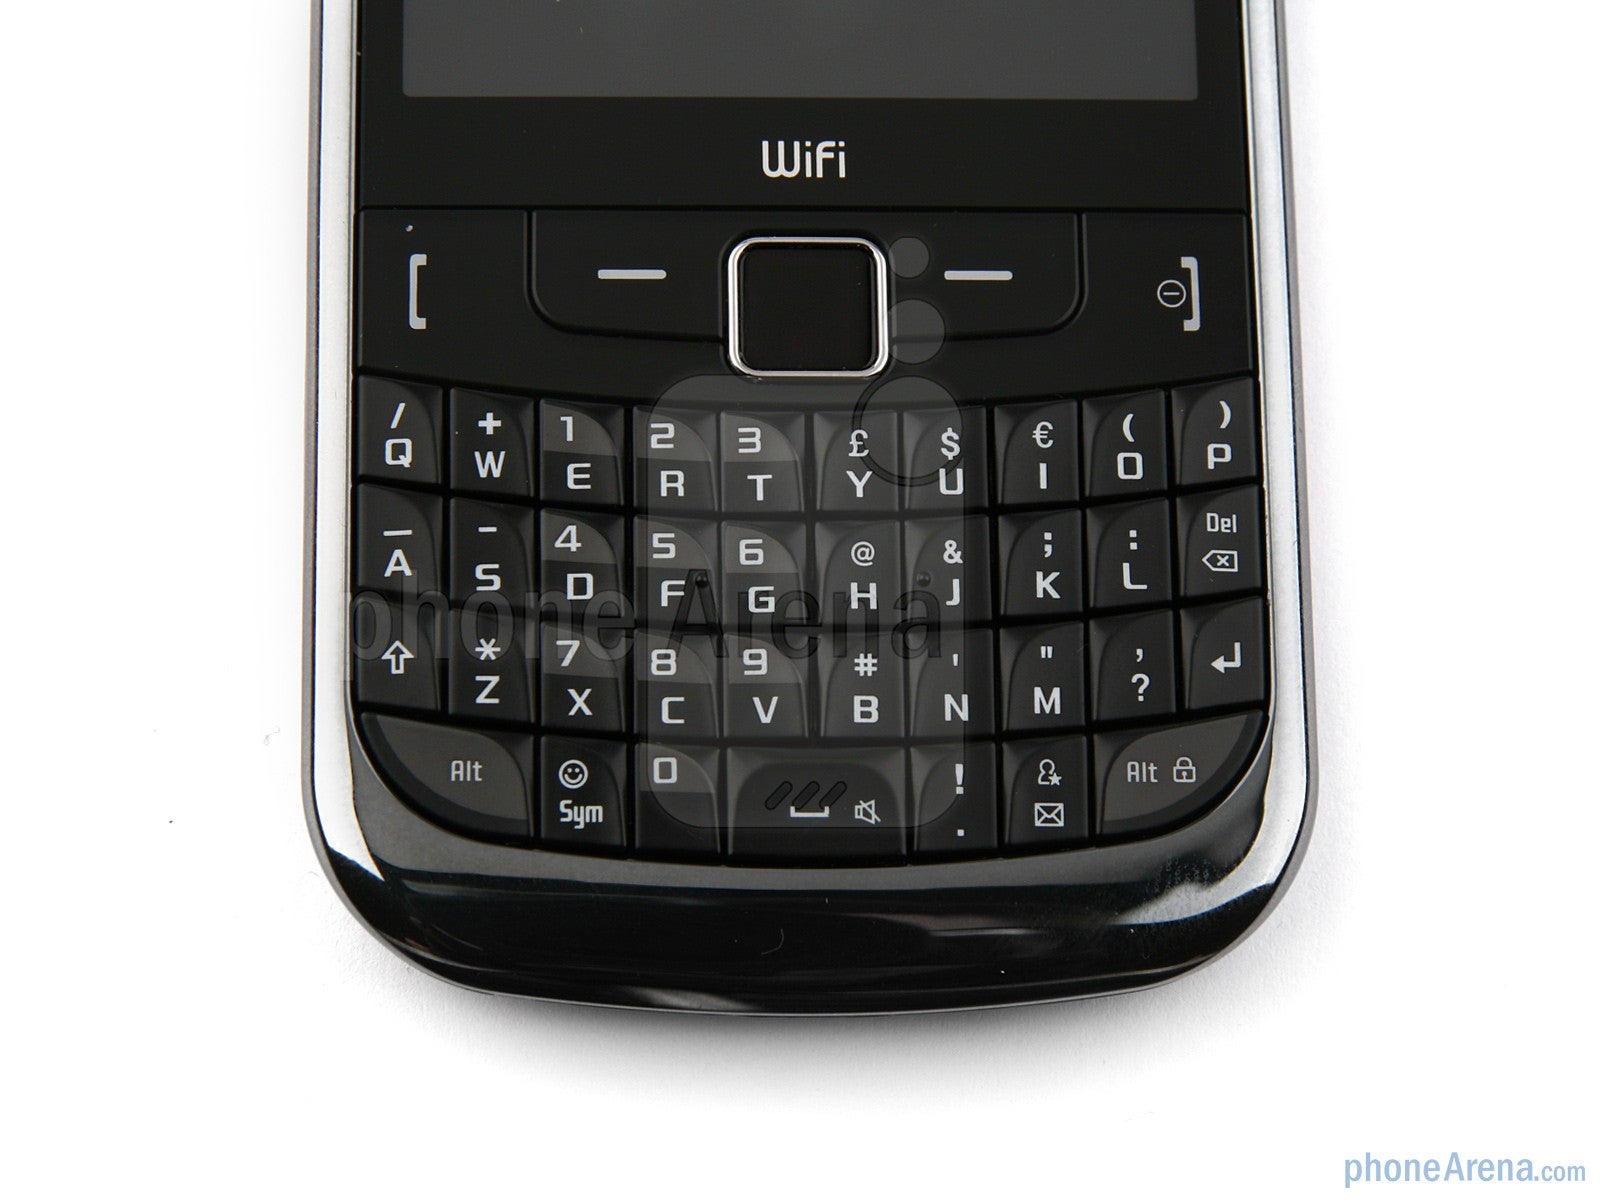 The Samsung Ch@t 335 has a full QWERTY keyboard - Samsung Ch@t 335 Preview